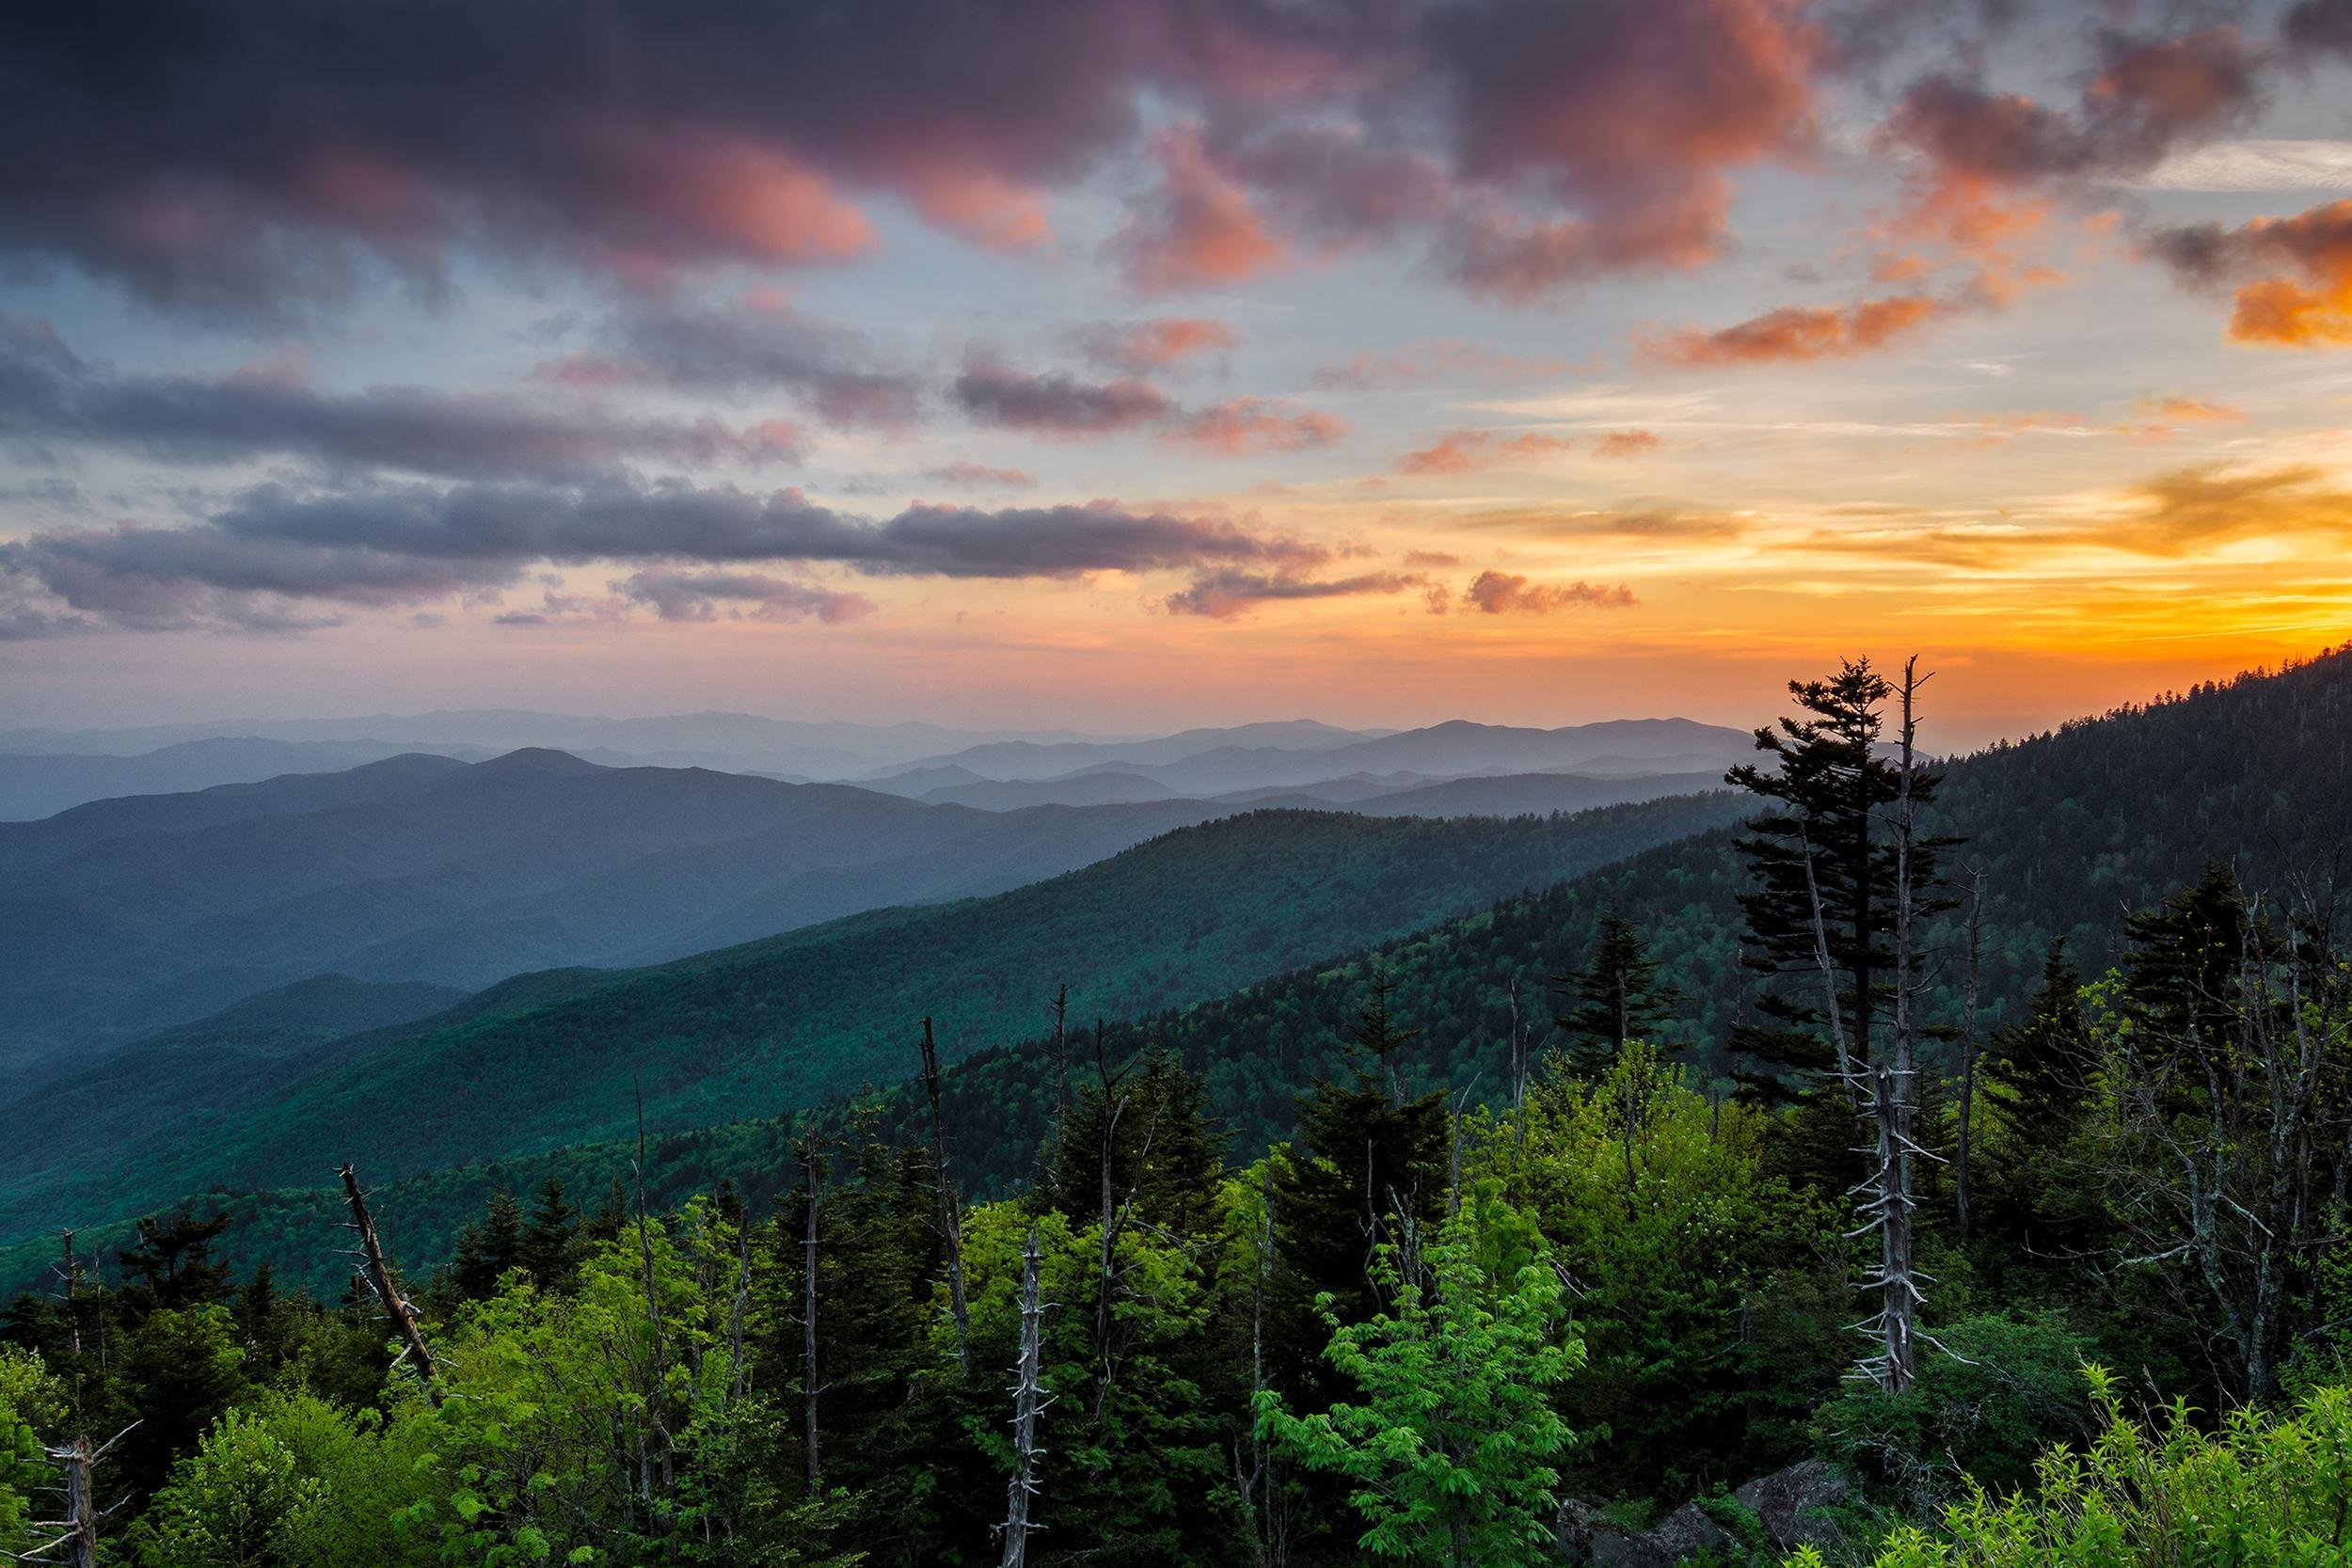 <p>Nature lovers hankering for another scenic selfie need look no further than breathtaking Clingmans Dome, the highest point in Great Smoky Mountains National Park, which straddles North Carolina and Tennessee. Occasionally a black bear might appear in the mountains and foliage behind you.  </p>